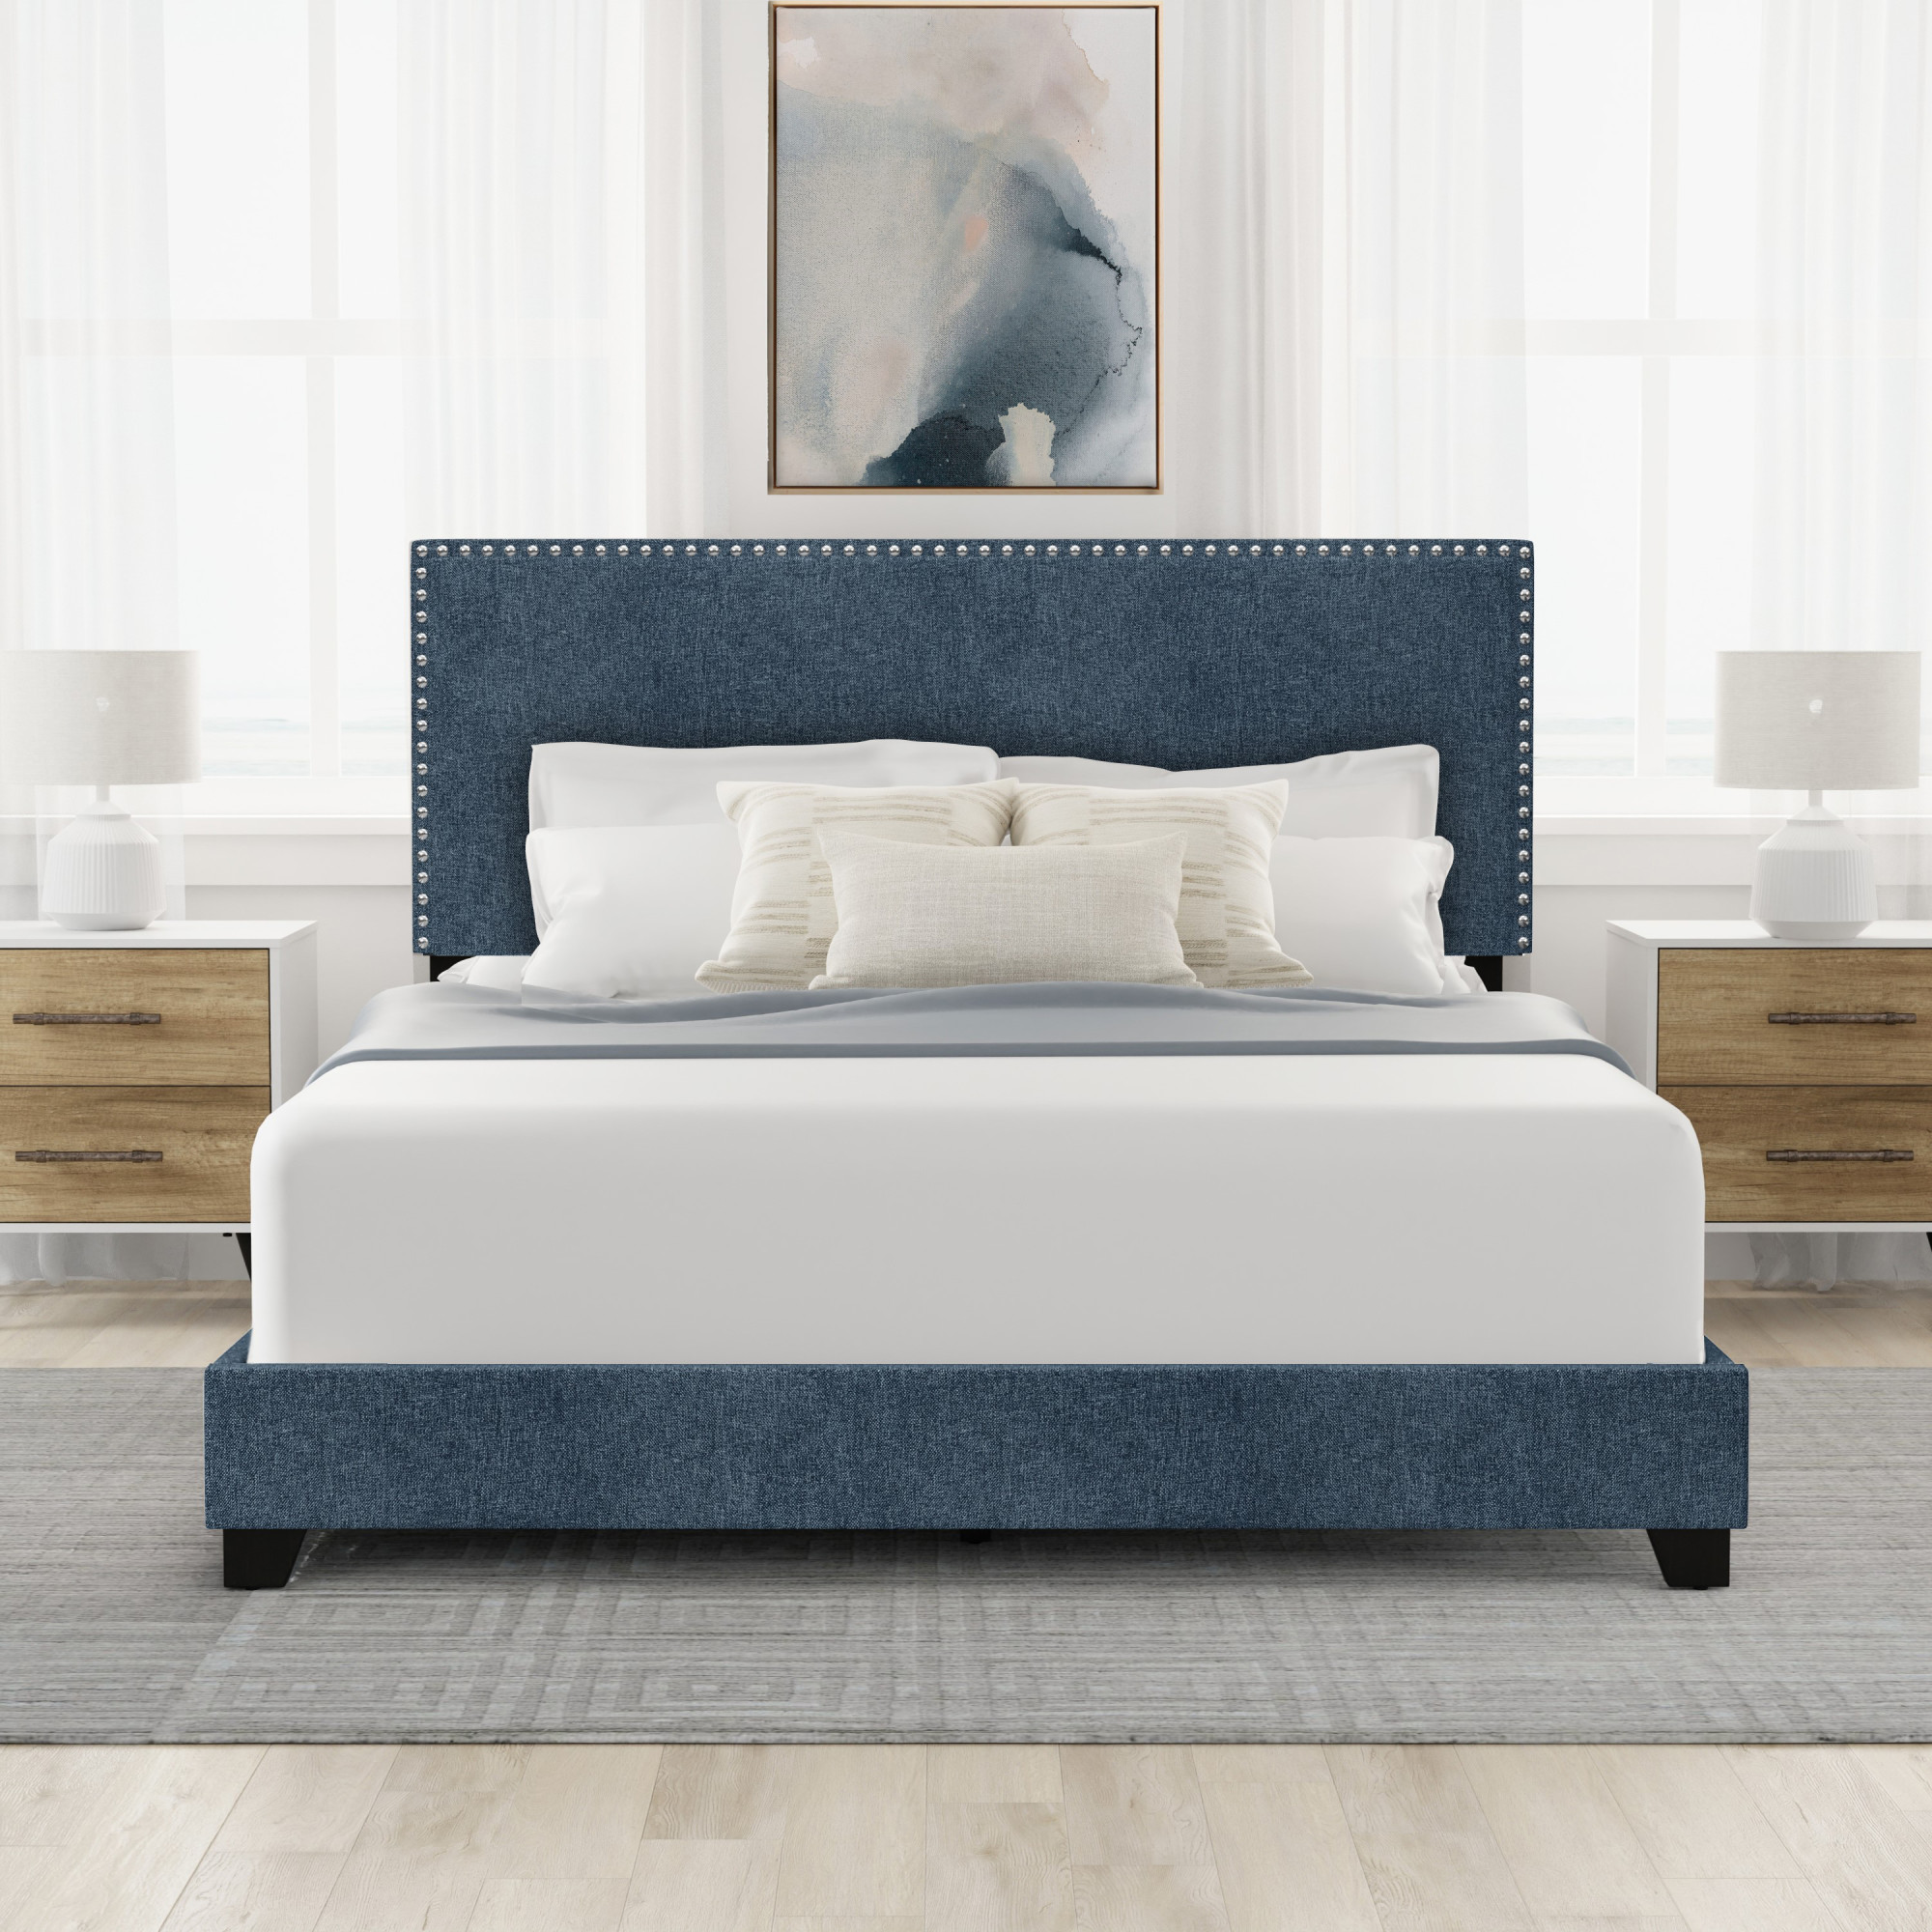 Willow Nailhead Trim Upholstered Queen Bed, Denim Fabric - image 3 of 17